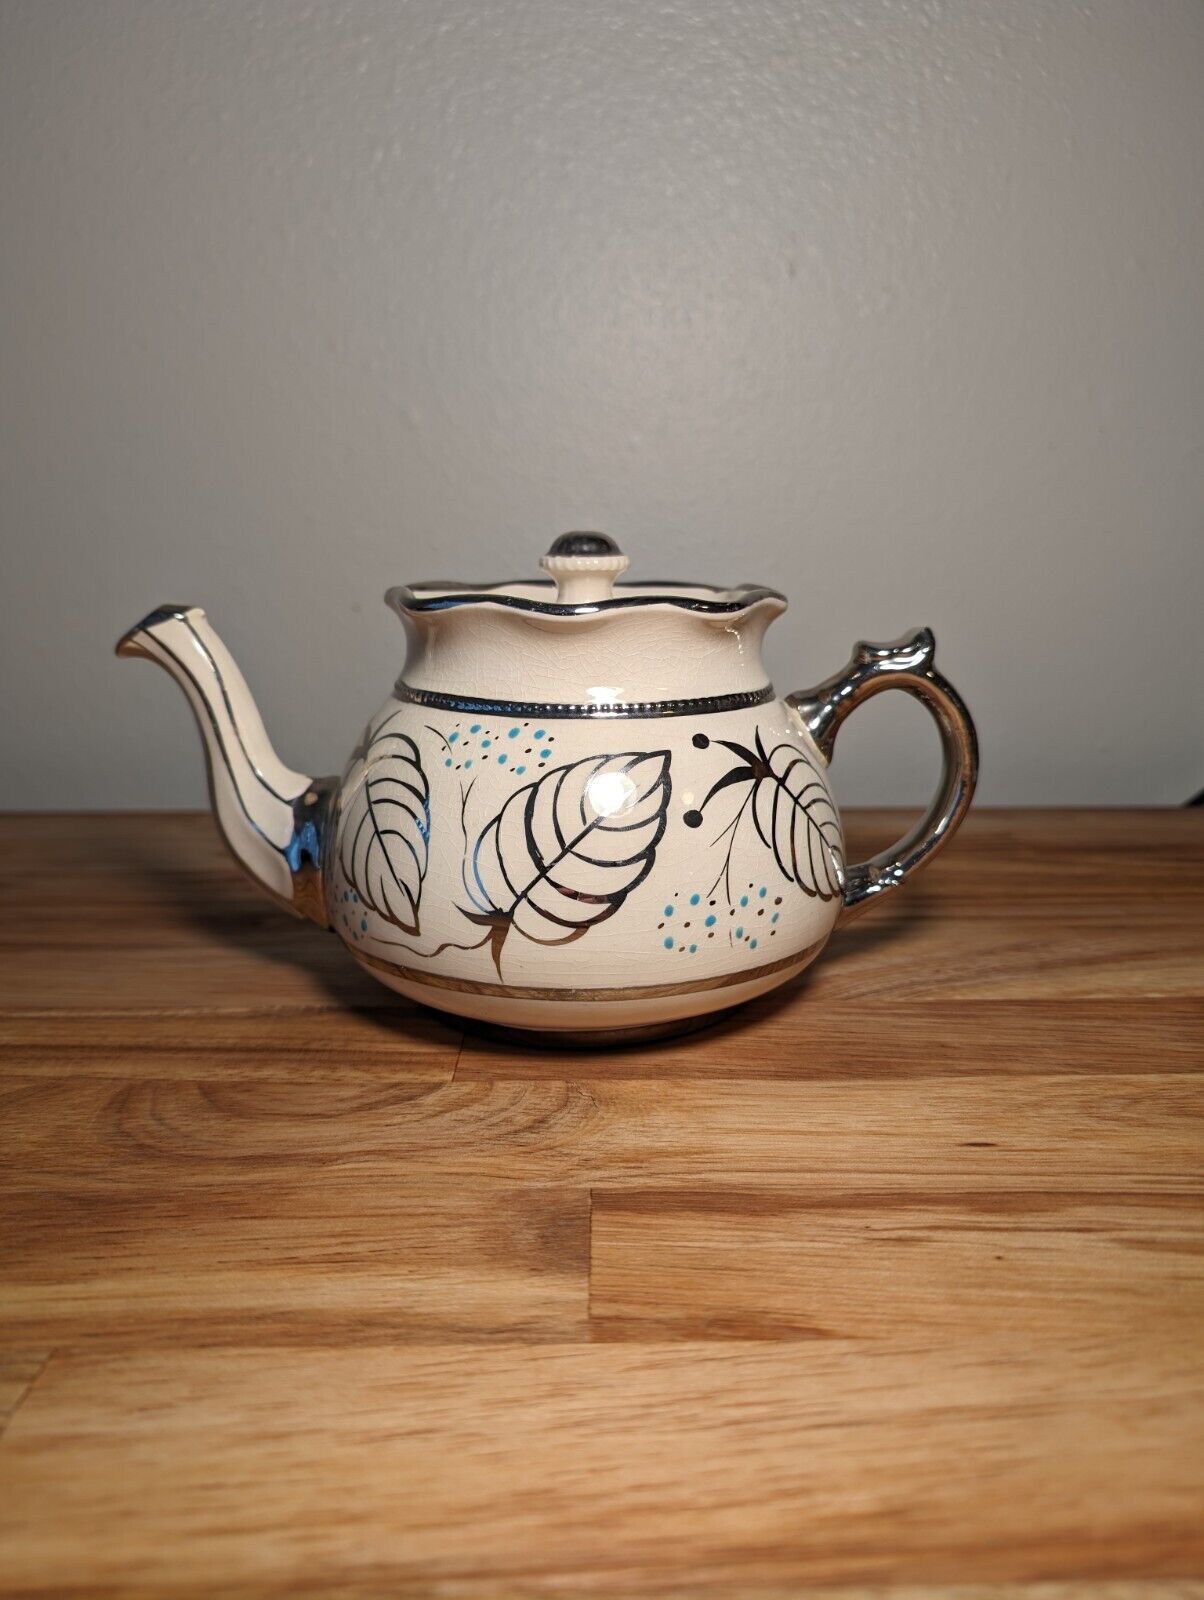 Arthur Wood teapot, Early 20th century, Made in England #835